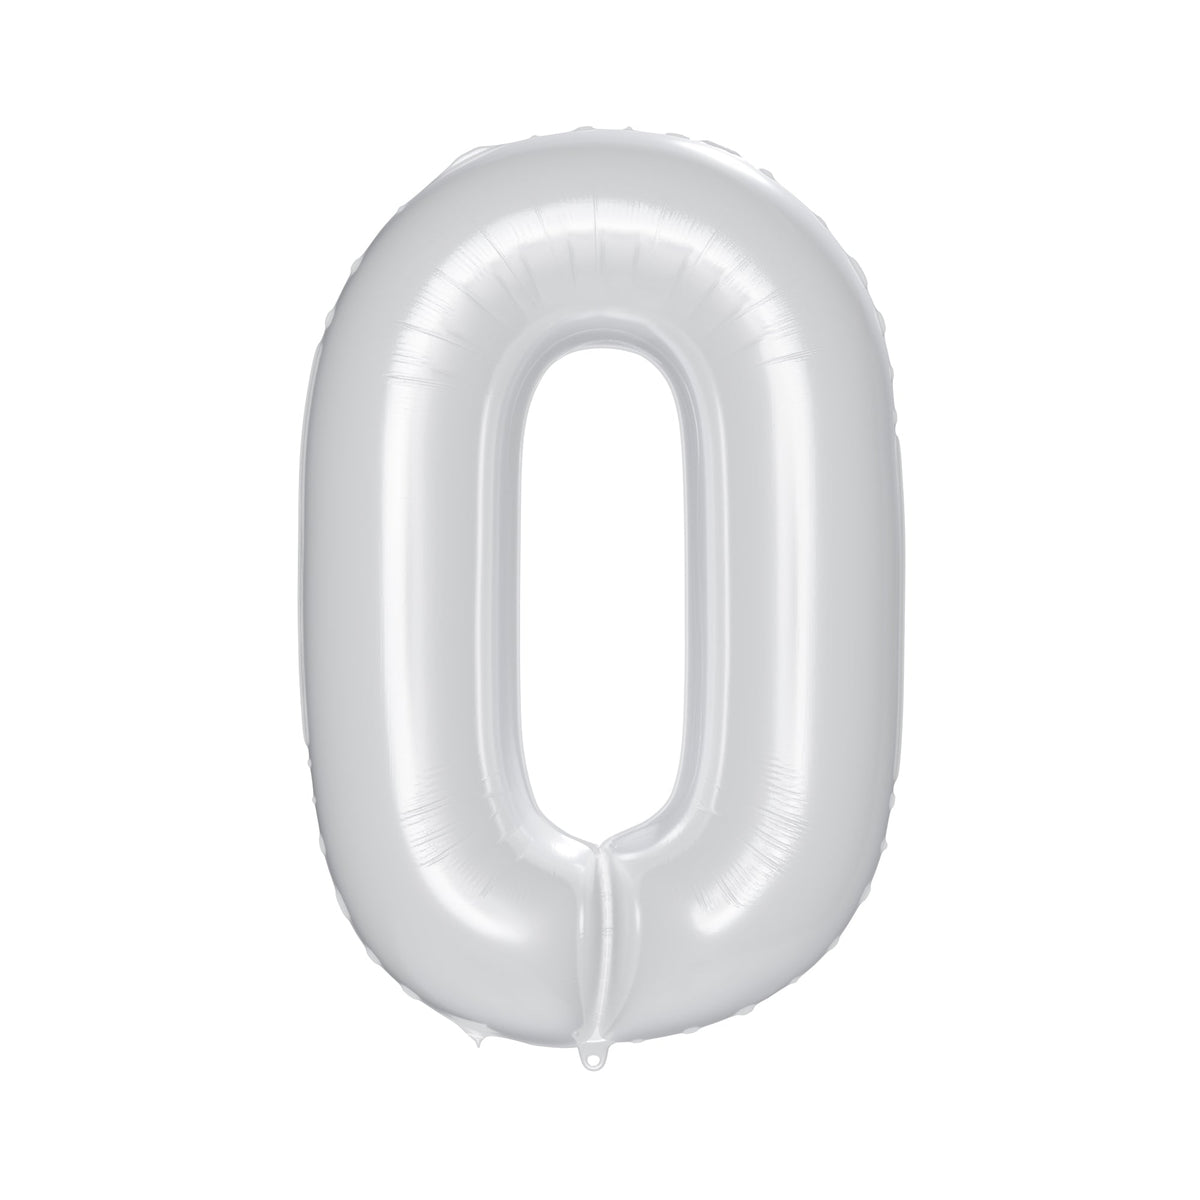 PARTYGRAM Balloons Frosty White Number 0 Foil Balloon, Matte Finish, 34 Inches, 1 Count 810077658147